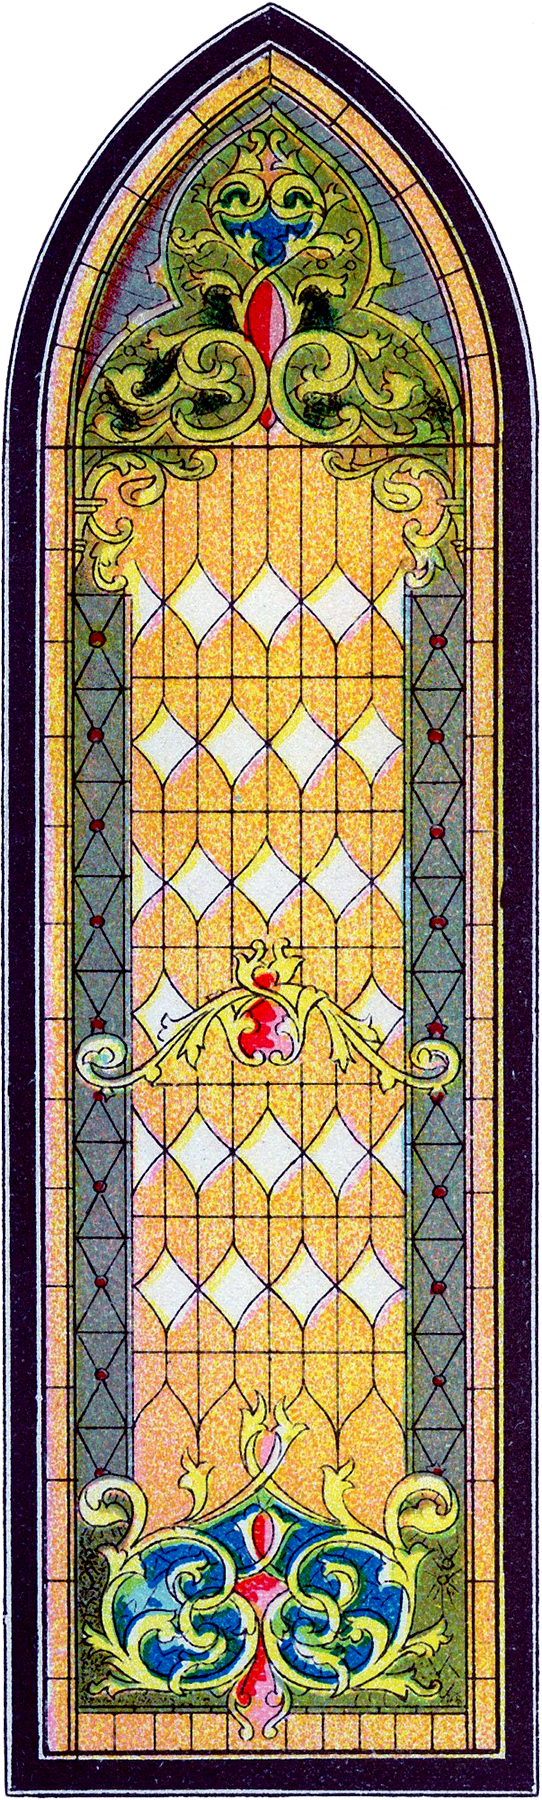 stained glass window clipart - photo #46